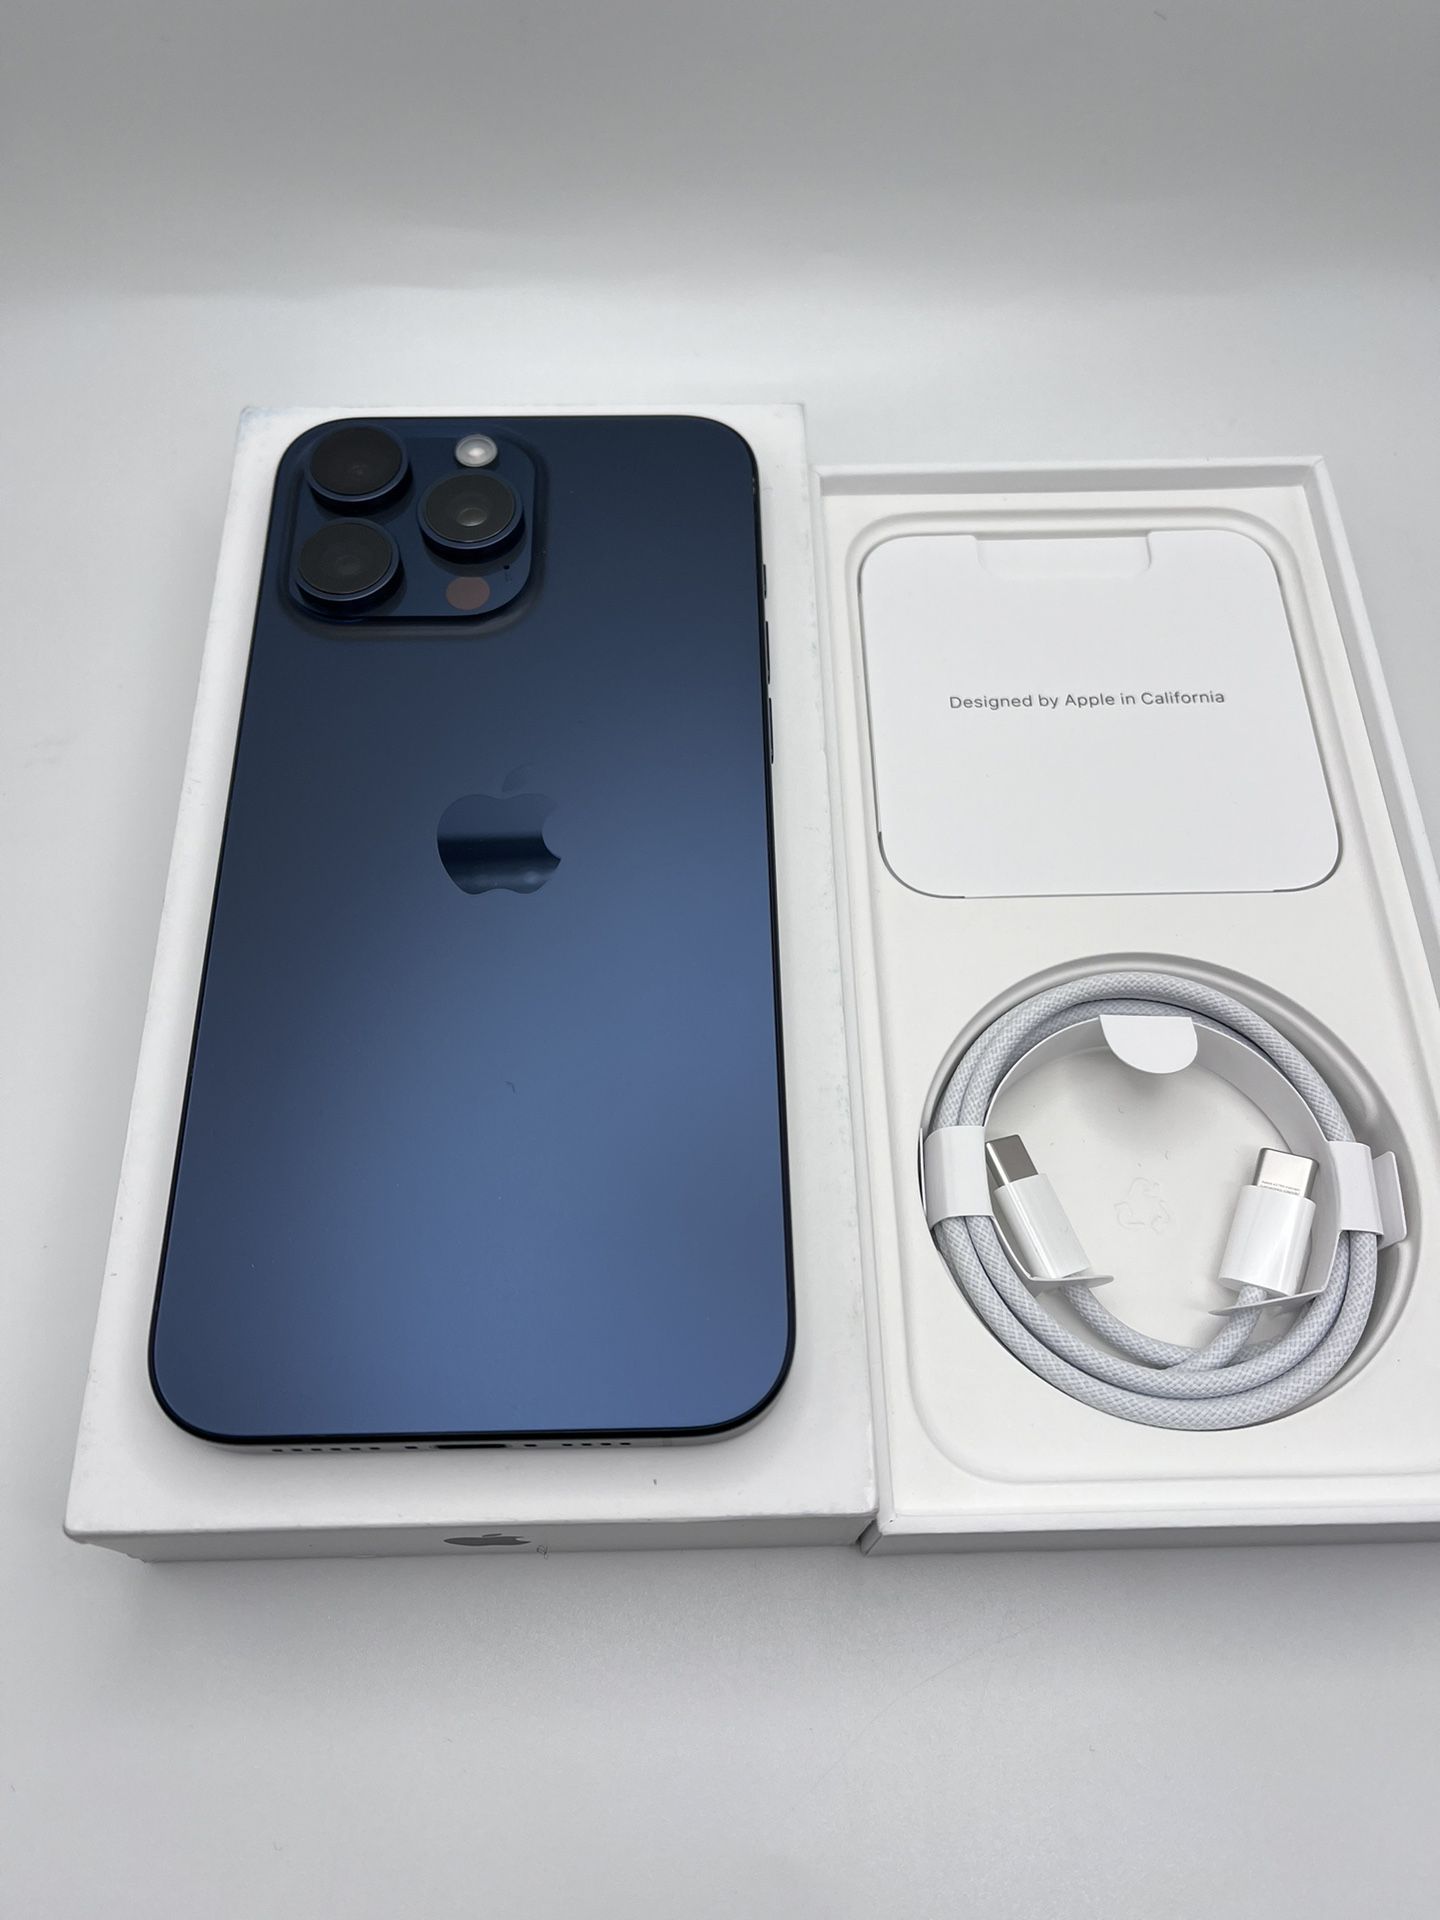 New apple iPhone 15 PRO MAX 1 Terabyte (1TB)  for AT&T or Cricket Only   Blue titanium  (El iPhone es para AT&T O Cricket solo)  New open box   Comes 